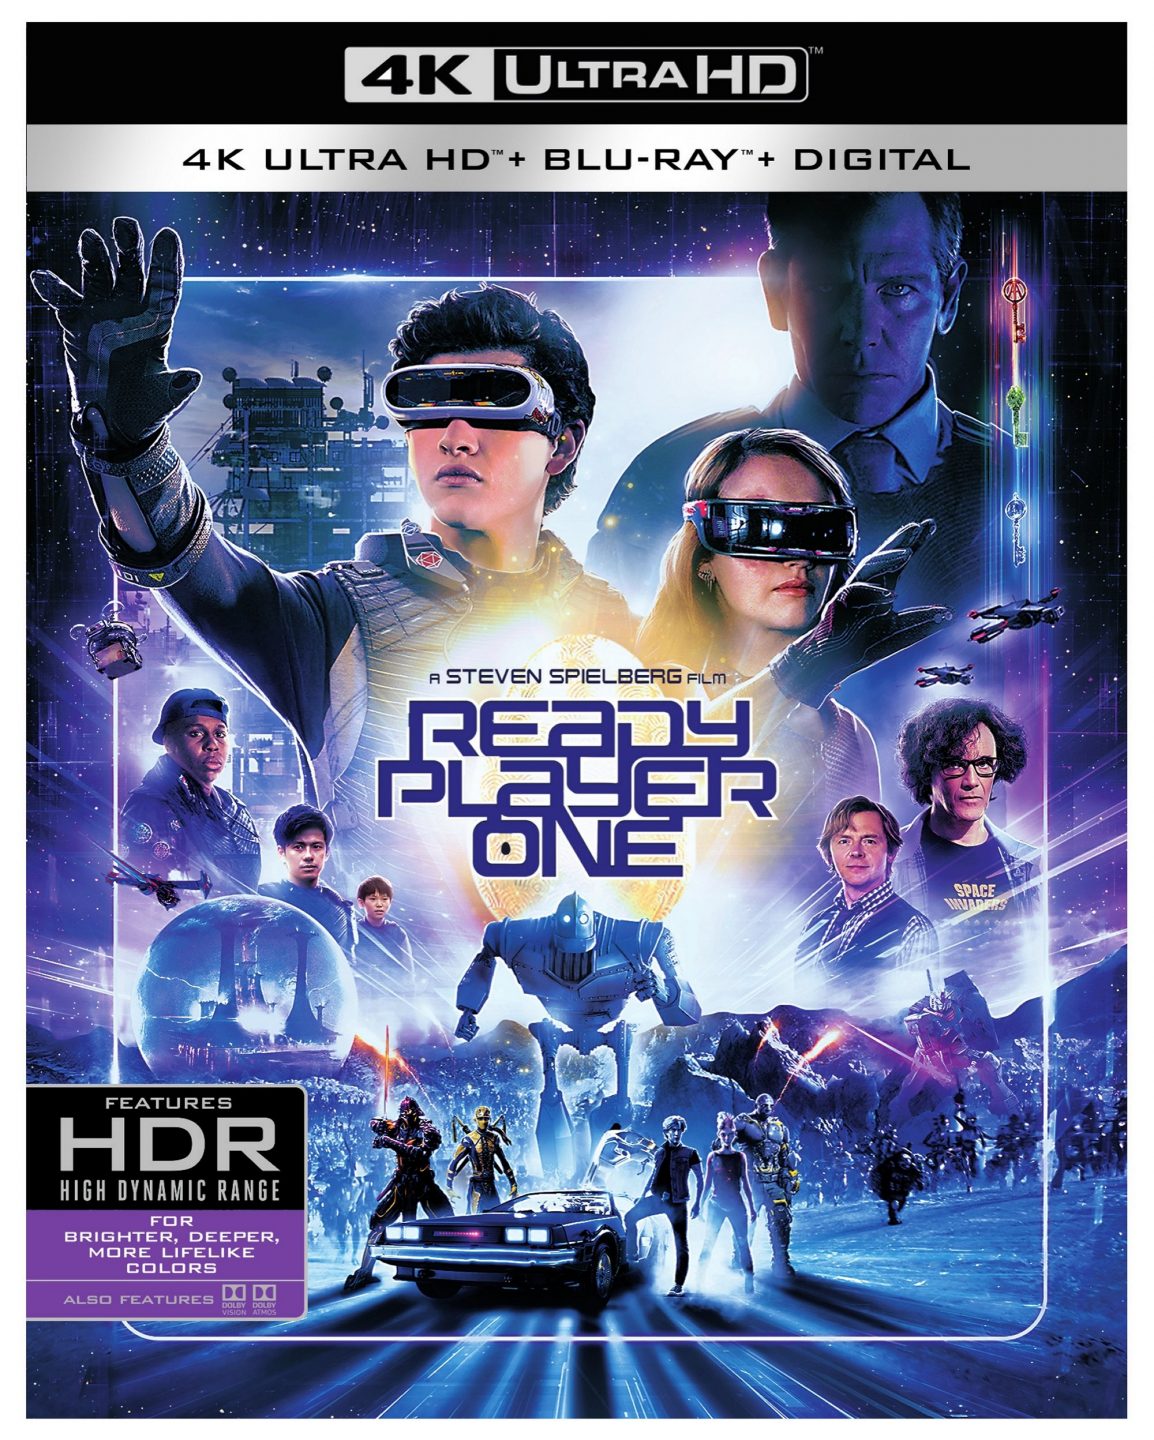 Ready Player One 4K Ultra HD Combo Pack cover (Warner Bros. Home Entertainment)